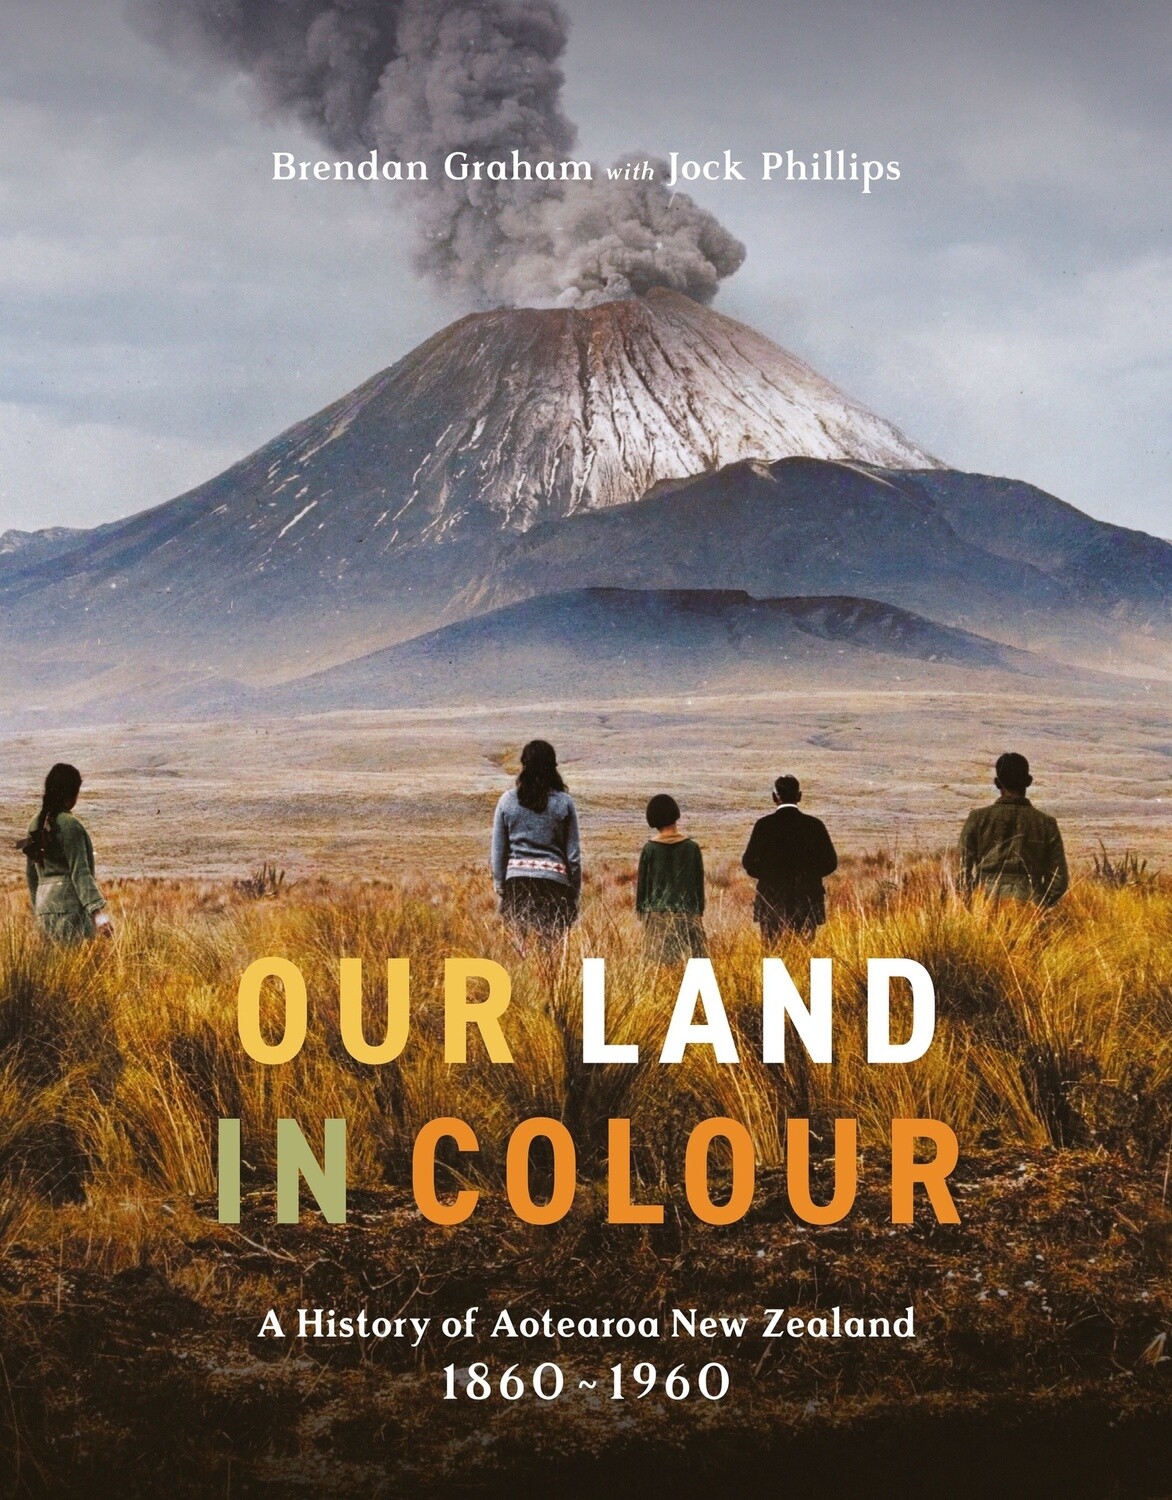 Our Land in Colour by Jock Phillips and Brendan Graham